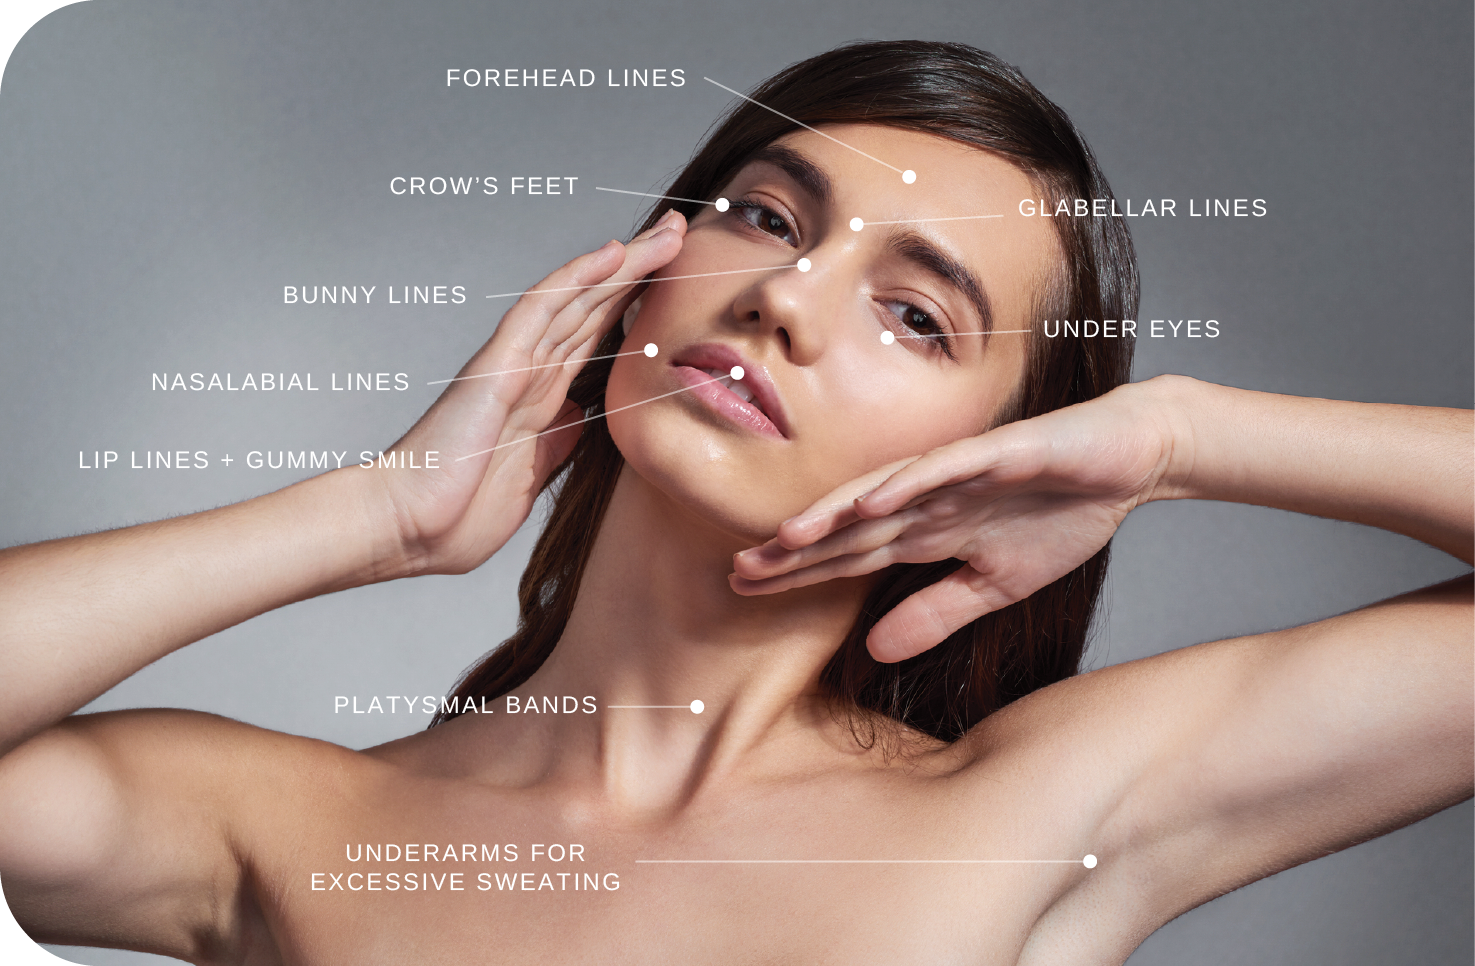 Botox can be used on multiple areas of the face. This image illustrates areas where botox can be used.